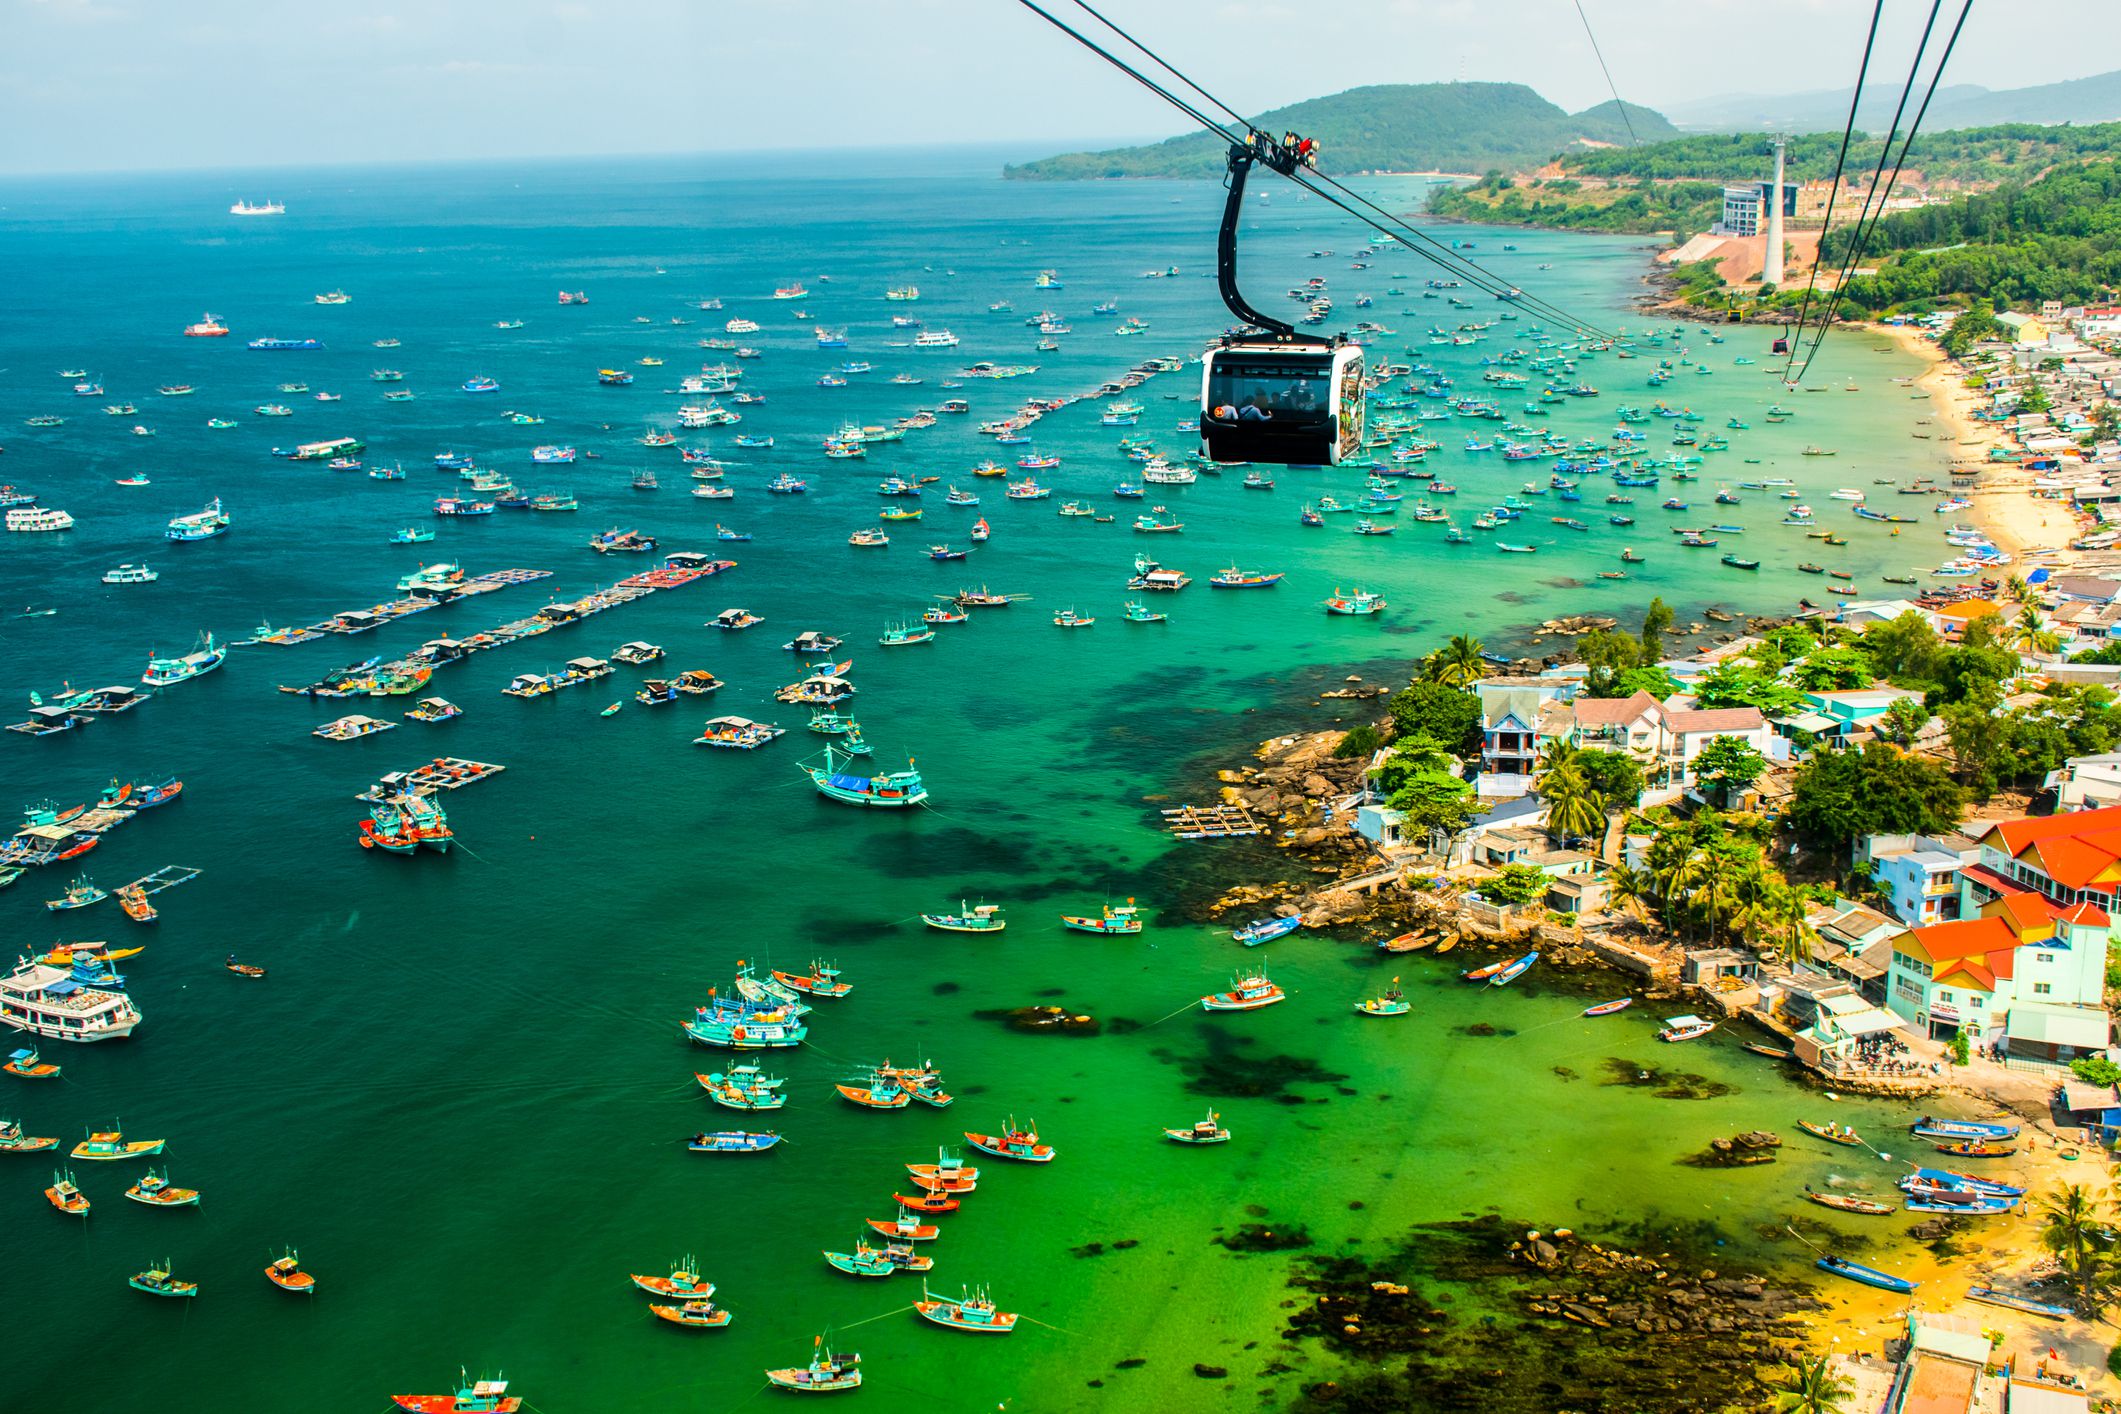 <p>Phu Quoc holds the Guiness record for the longest cable car, 7,899.9 meters, or about 4.9 miles. Riders will get a one-of-a-kind view of the city and its waterways. The city is also a popular destination for fishers. </p>